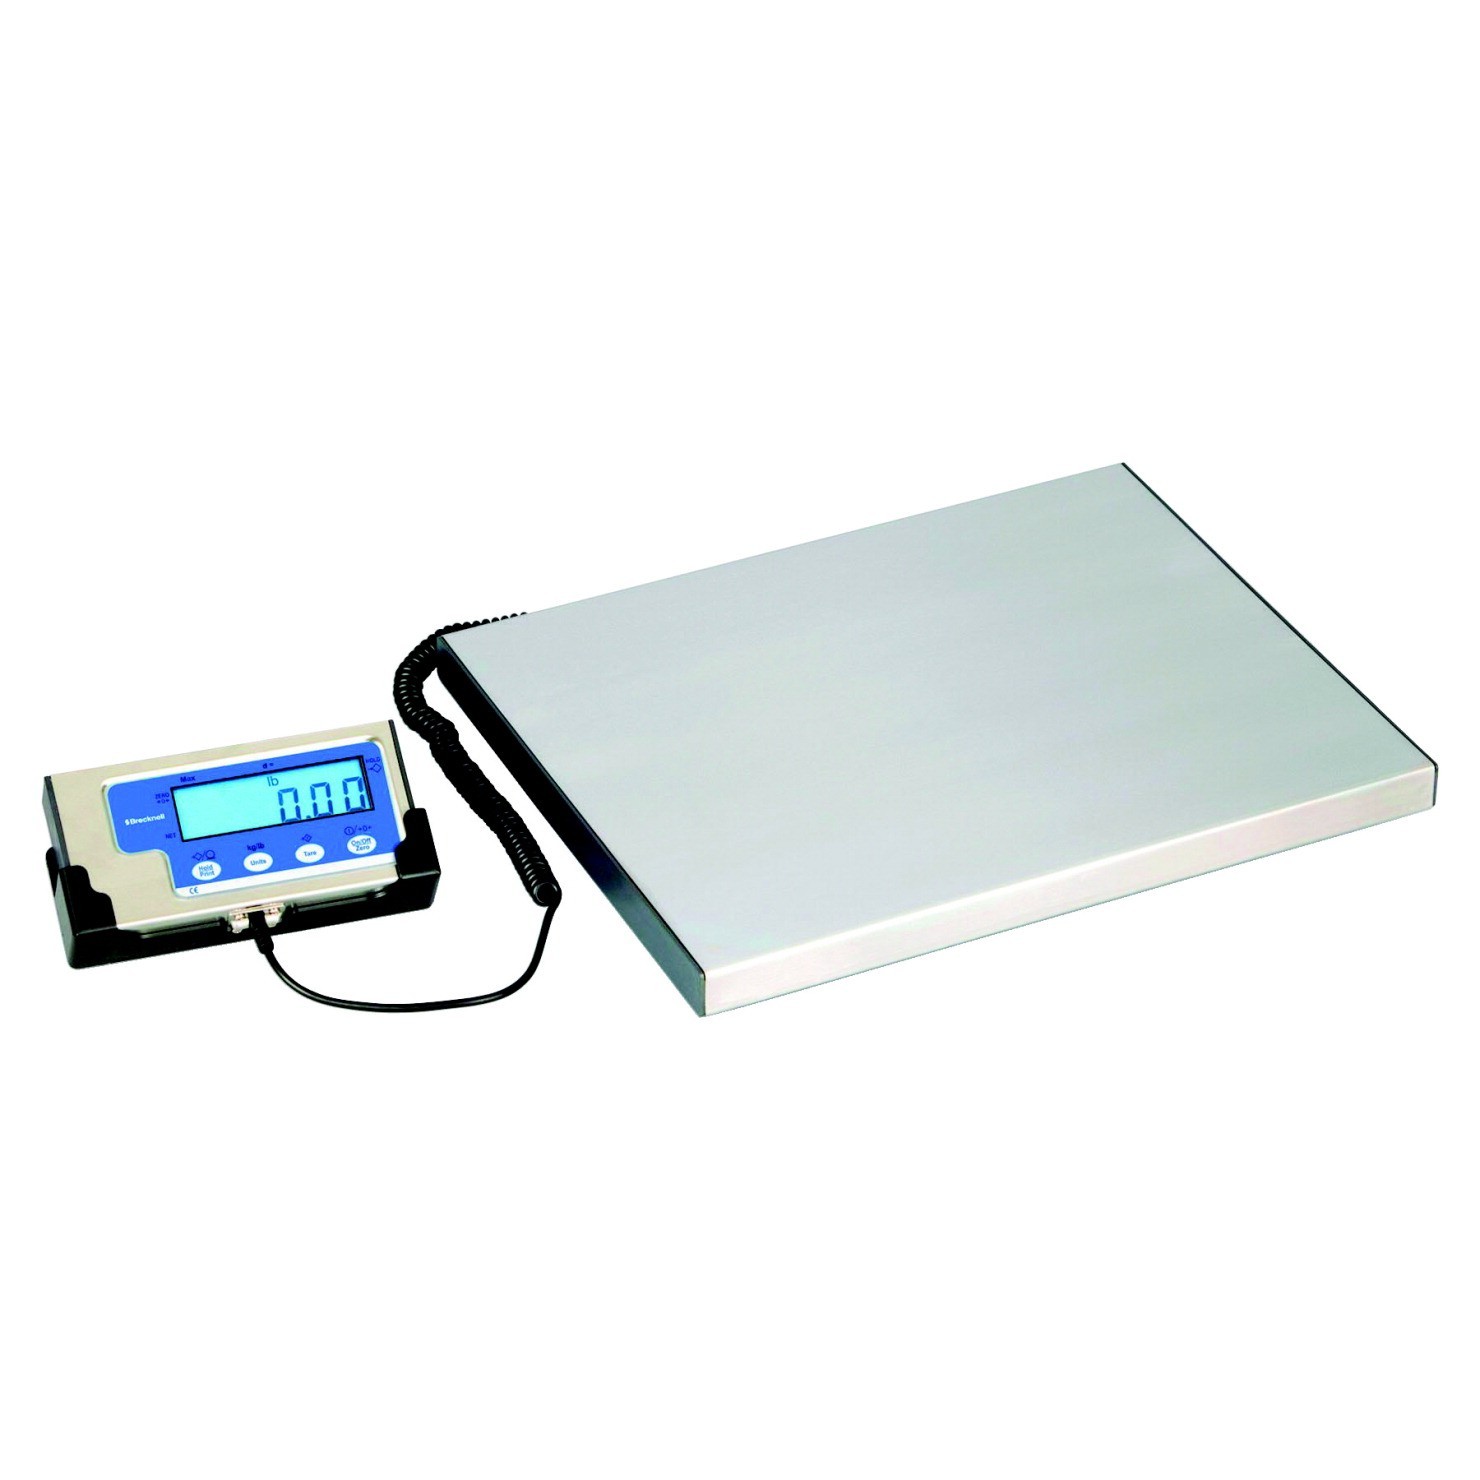 Portable Digital Shipping Scale, 400 Lb, White, 15 X 12 In.